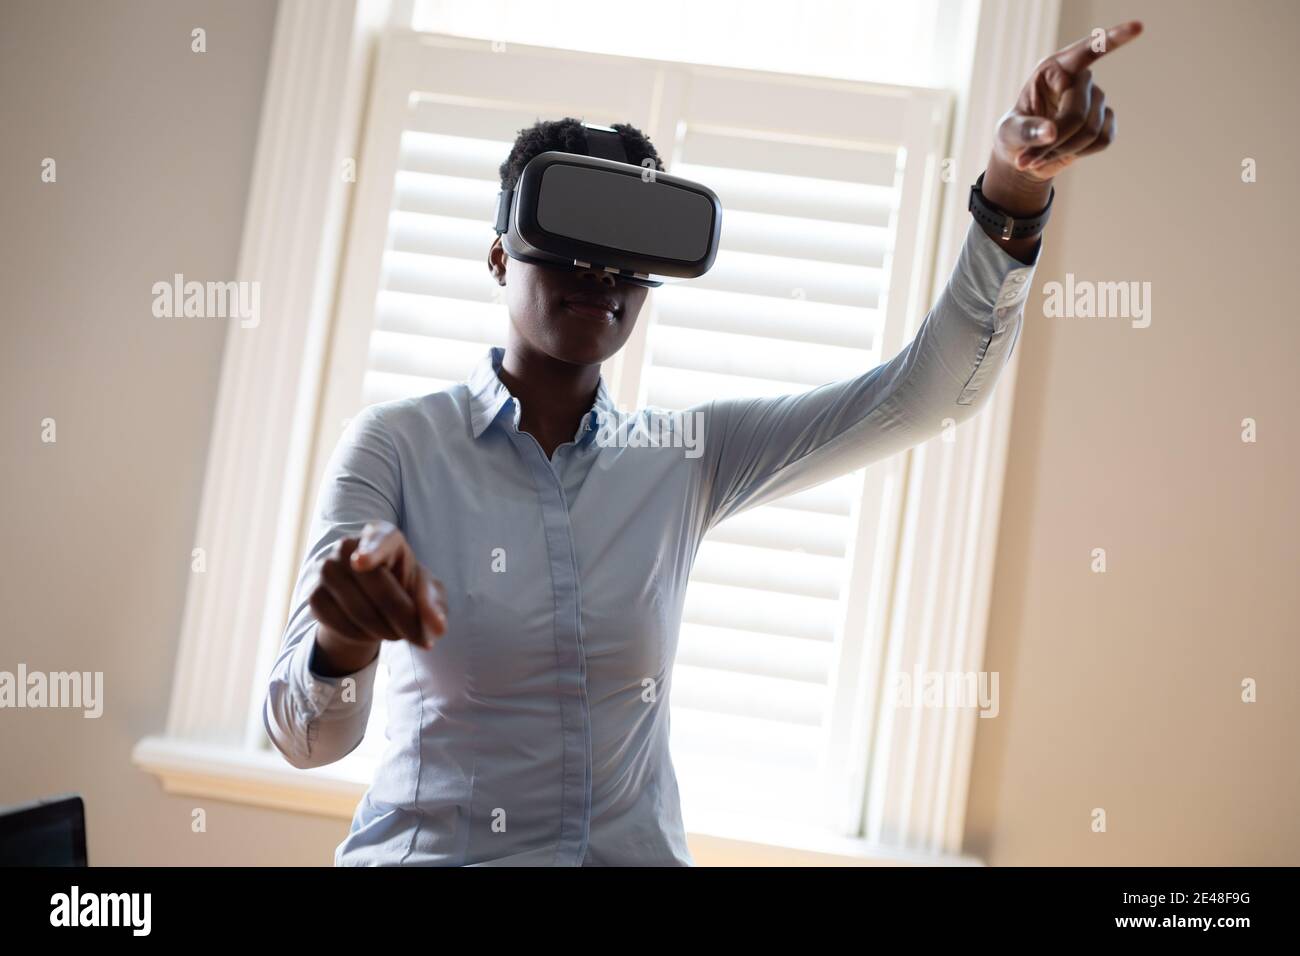 African american woman using vr headset in kitchen Stock Photo